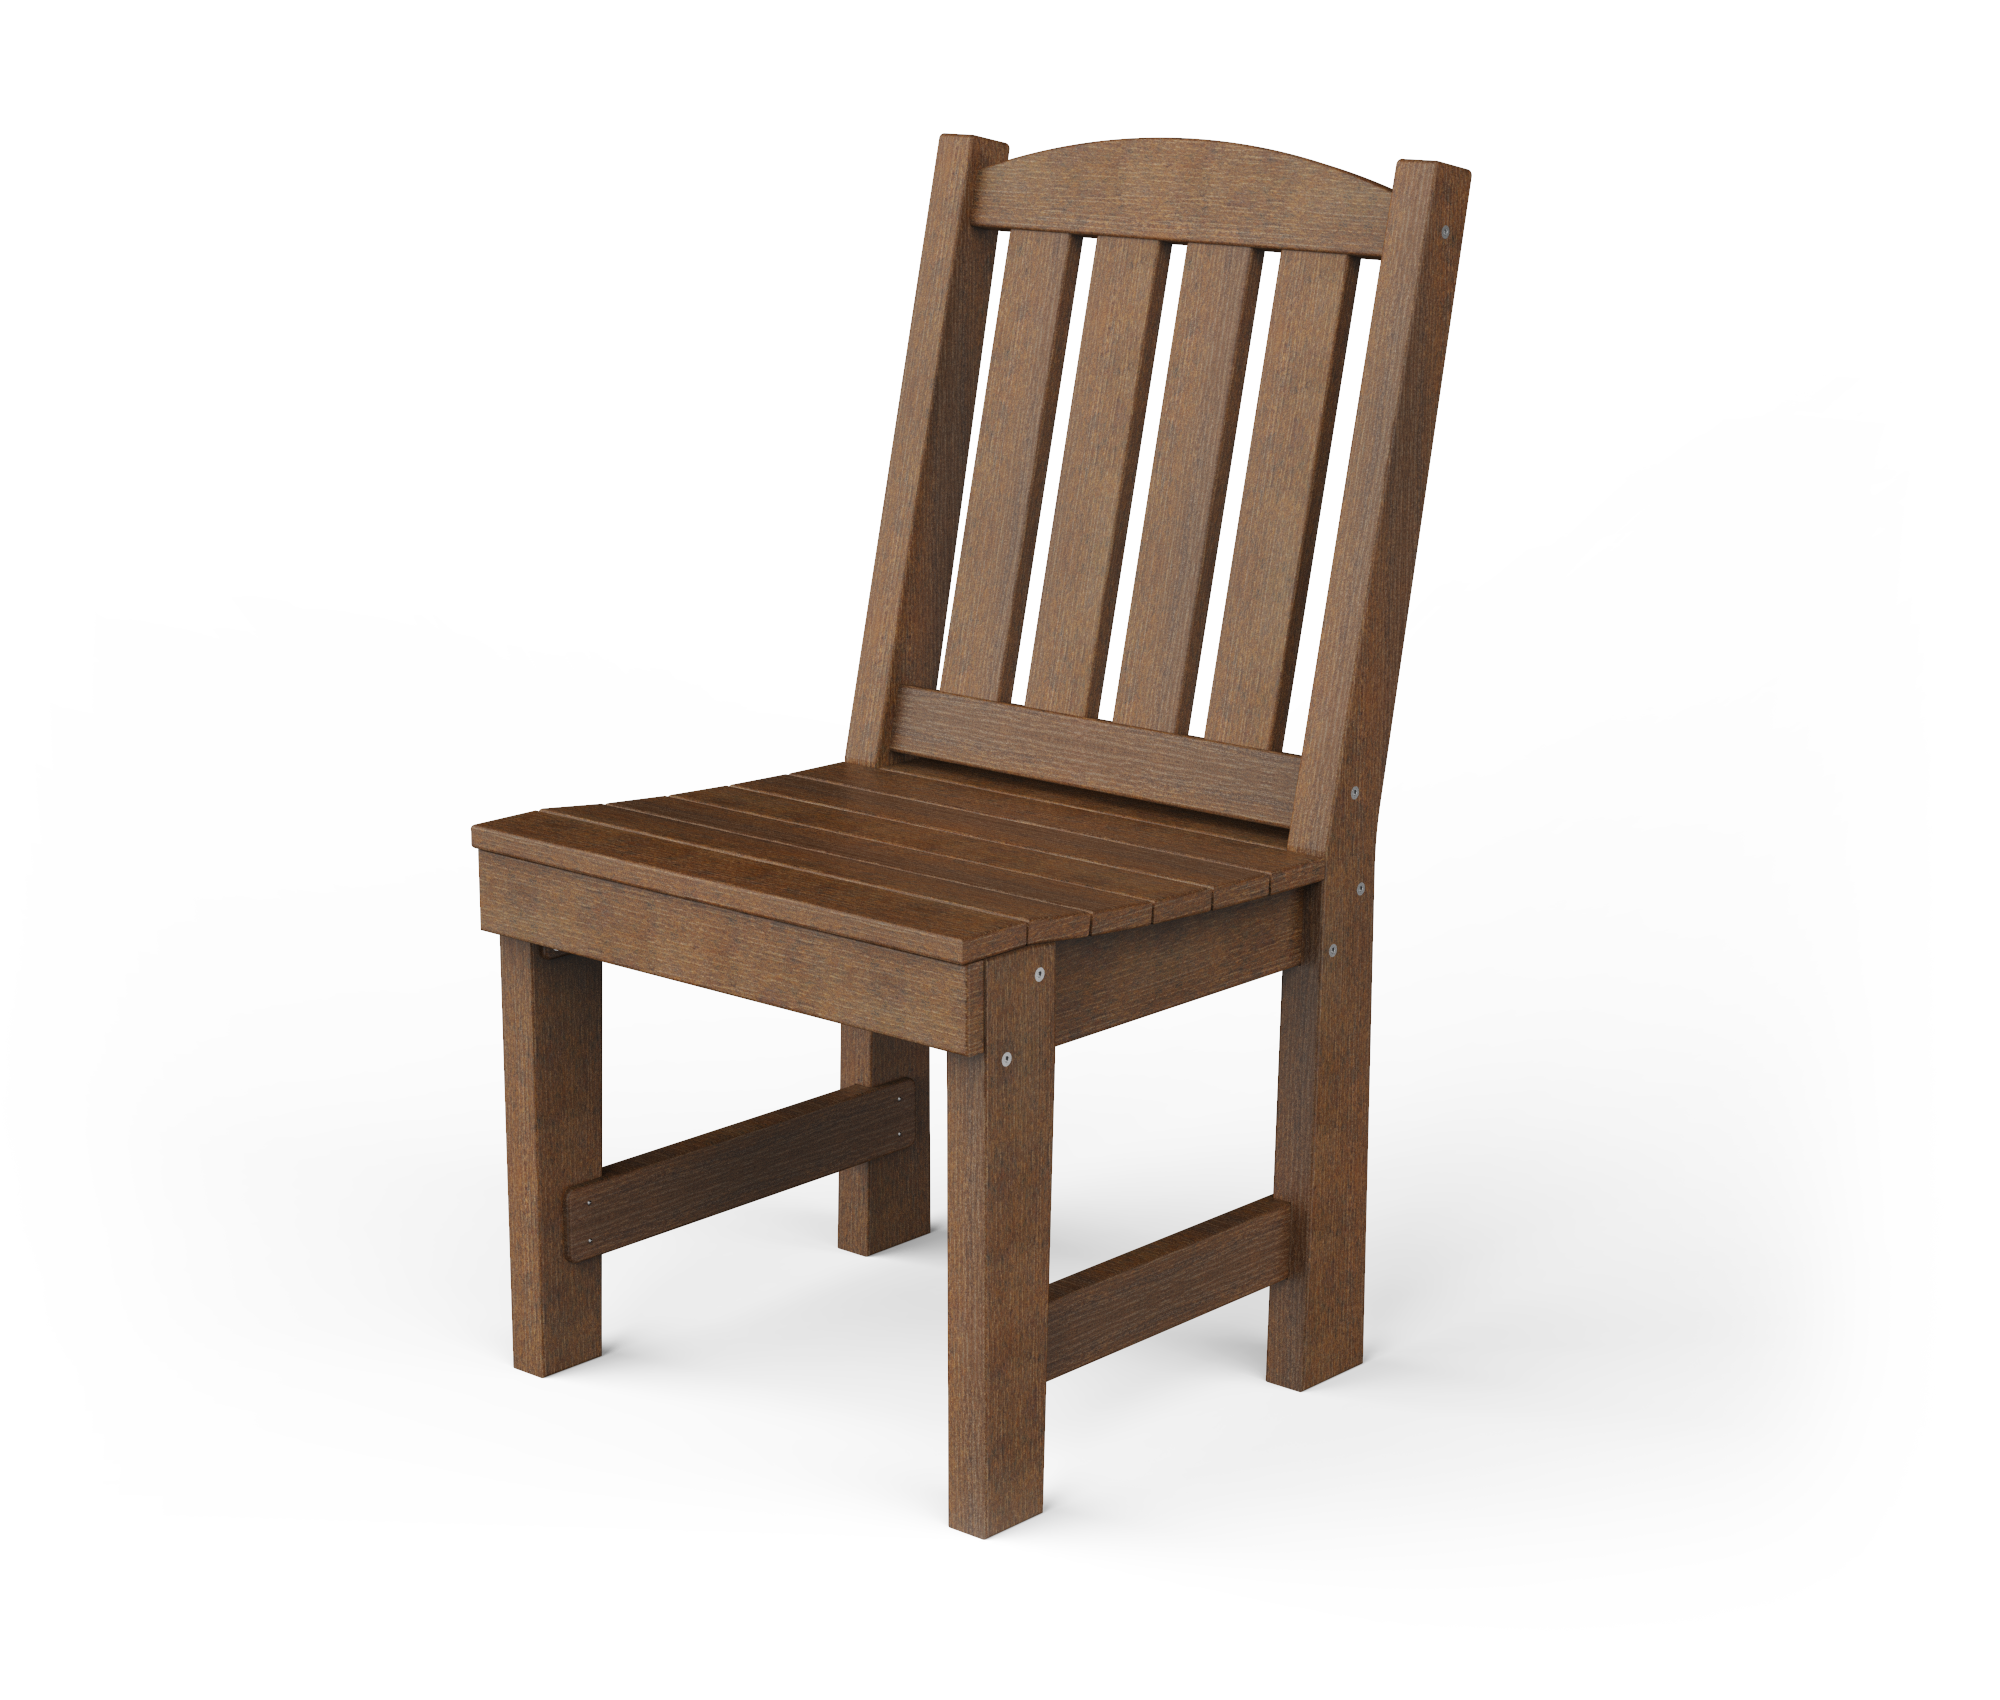 Poly, English Garden, dining chair.